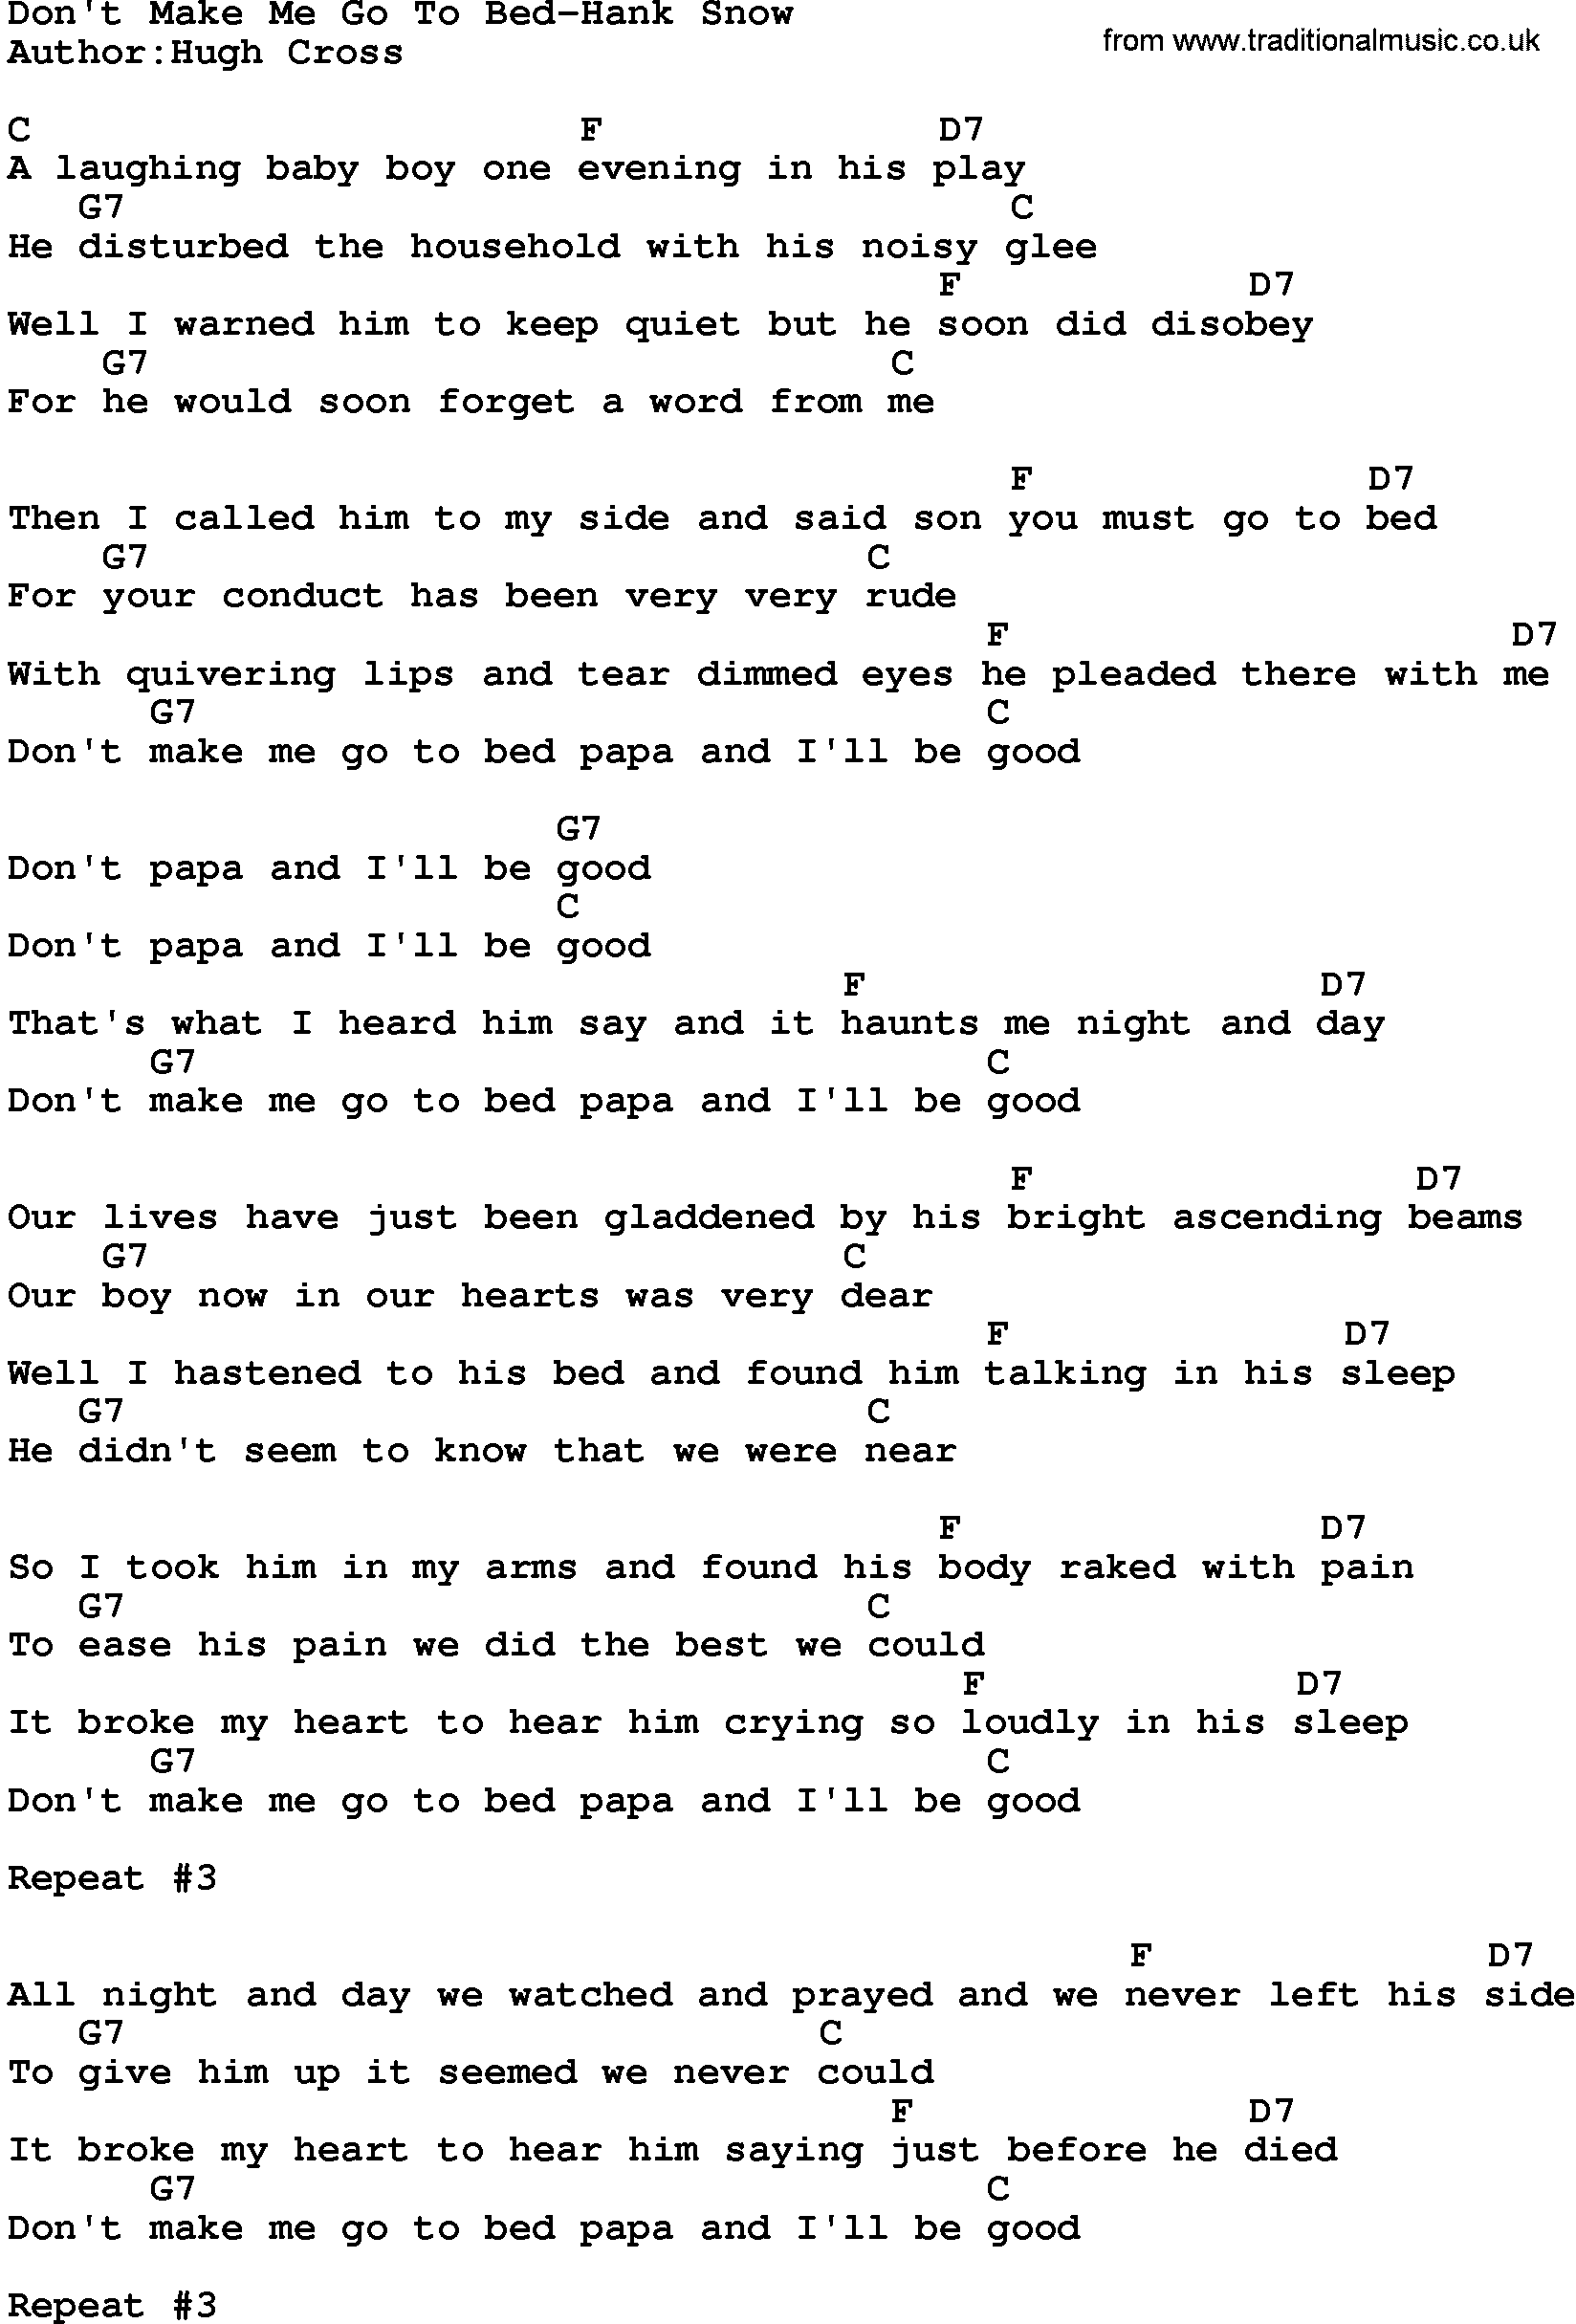 Country music song: Don't Make Me Go To Bed-Hank Snow lyrics and chords